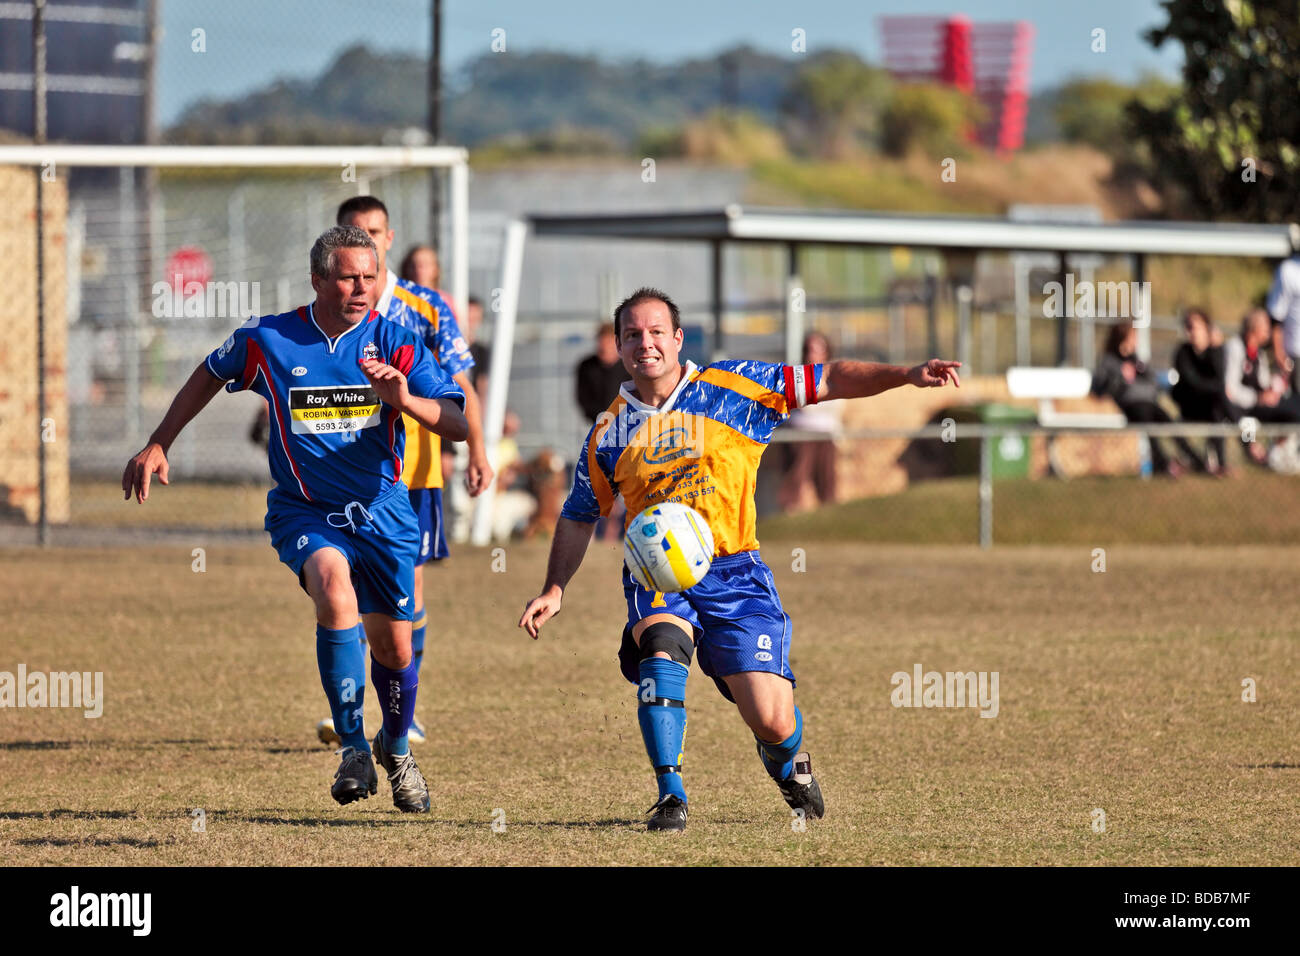 Two soccer teams playing a match heading the ball dribbling and kicking Stock Photo